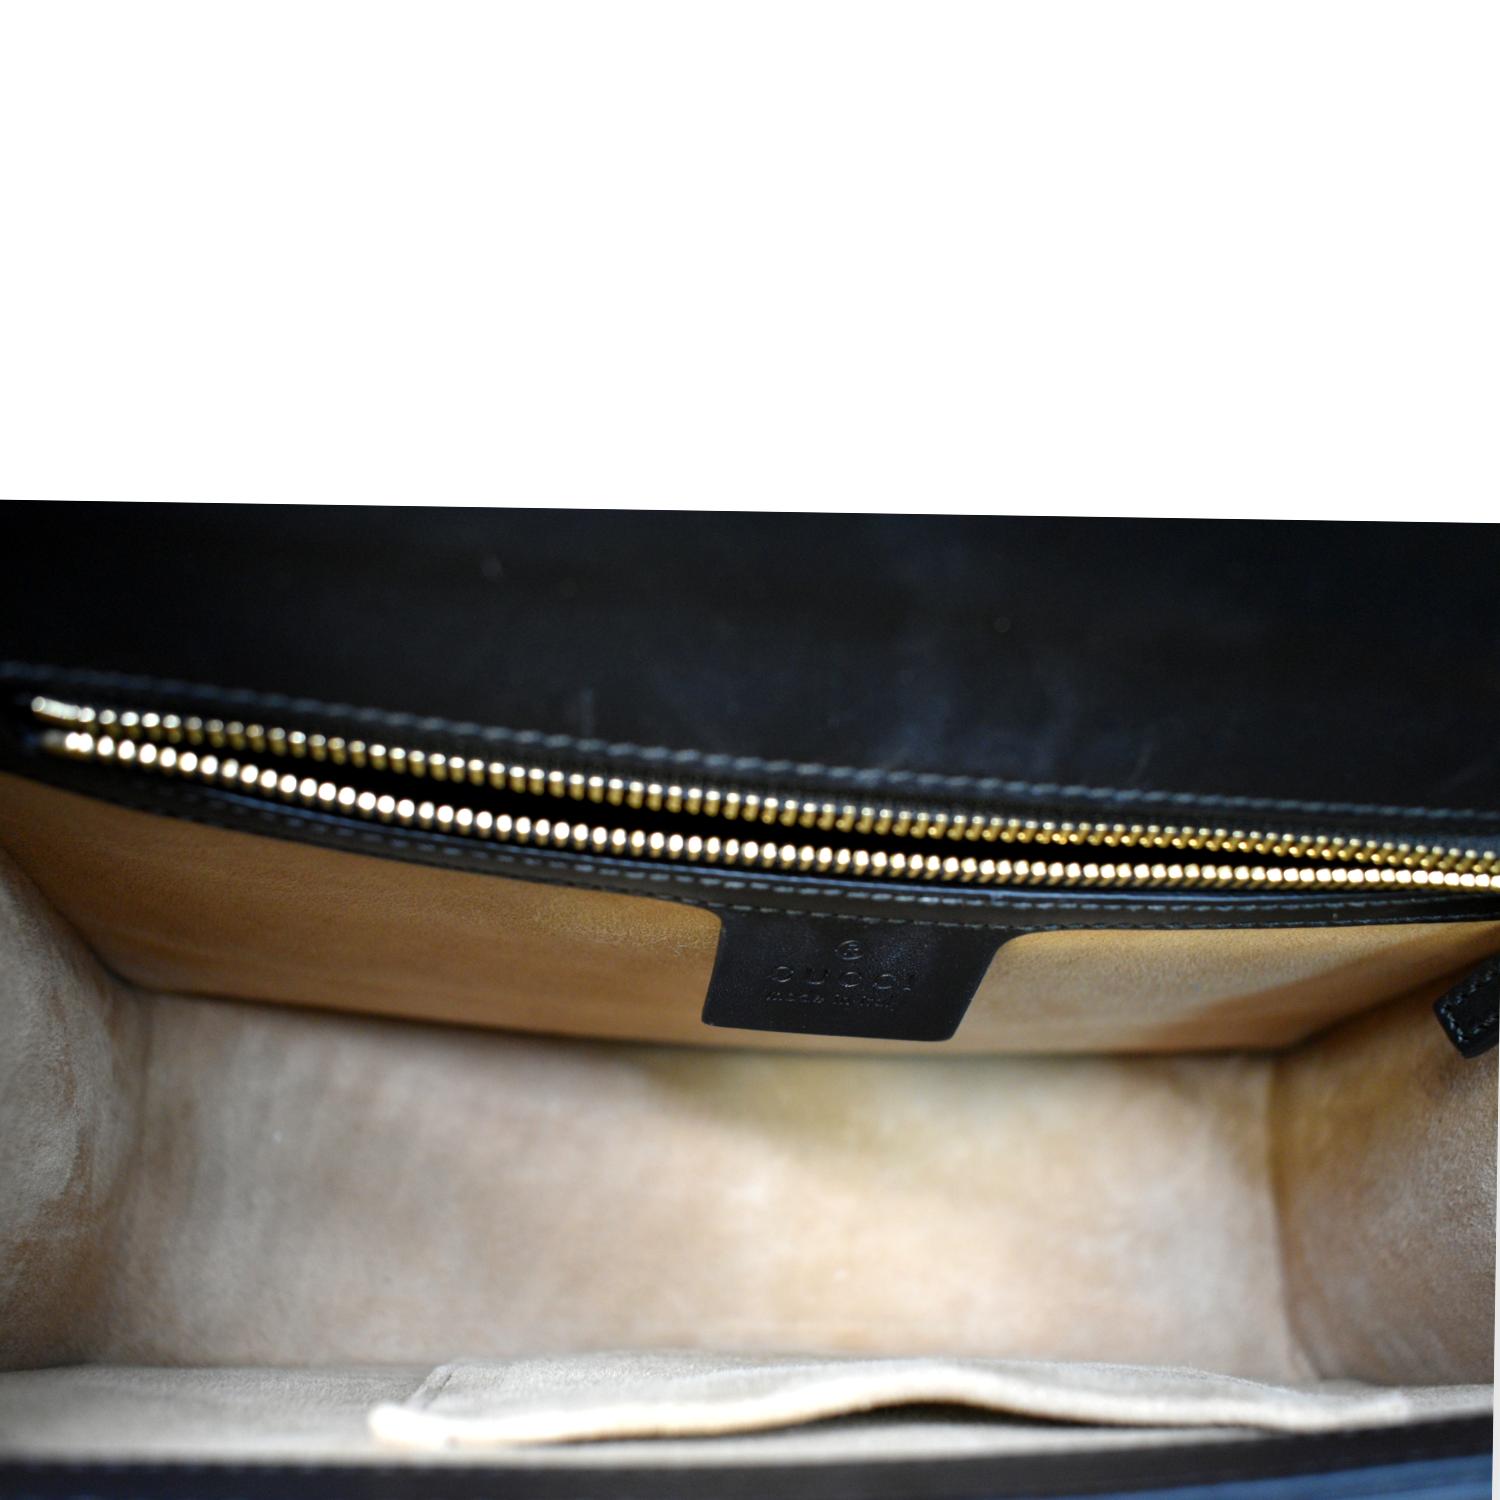 Gucci Small Suede and Leather Bag — LSC INC